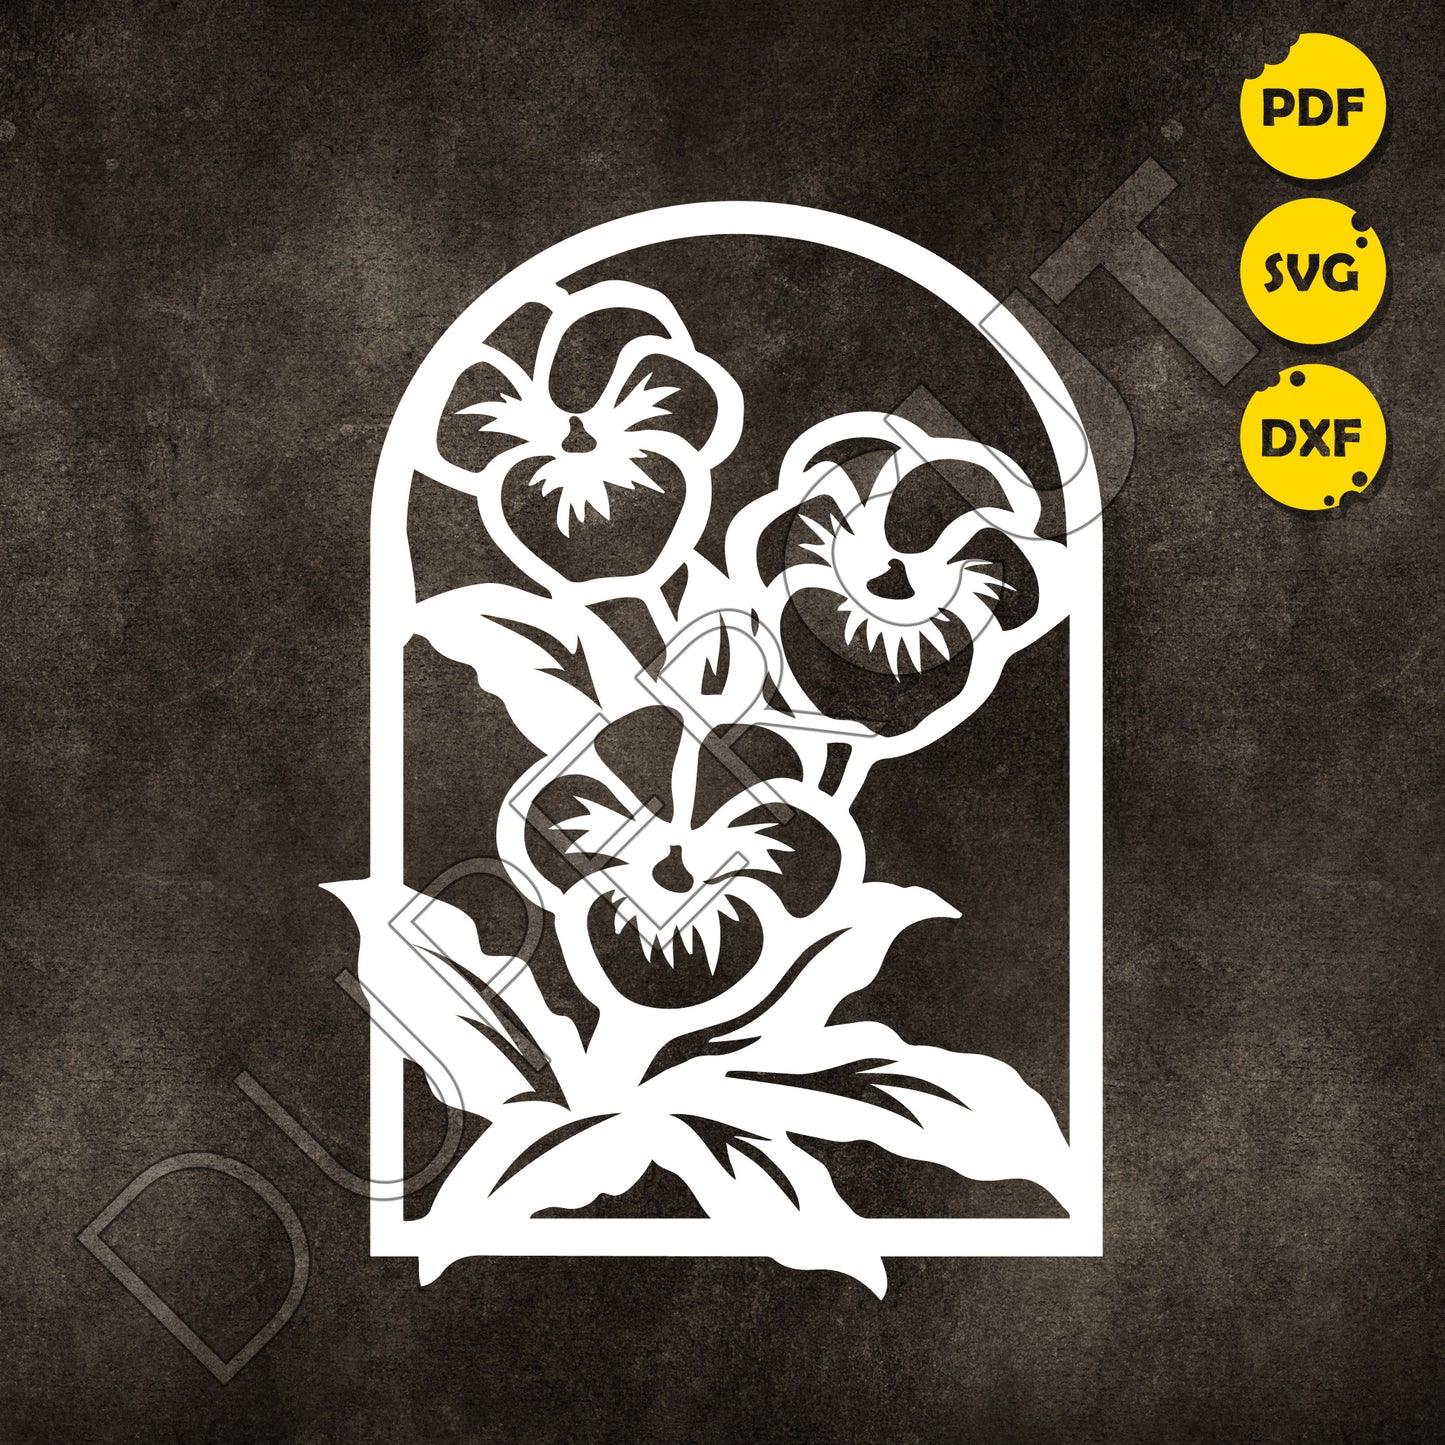 Pansies flowers - SVG DXF JPEG files for CNC machines, laser cutting, Cricut, Silhouette Cameo, Glowforge engraving